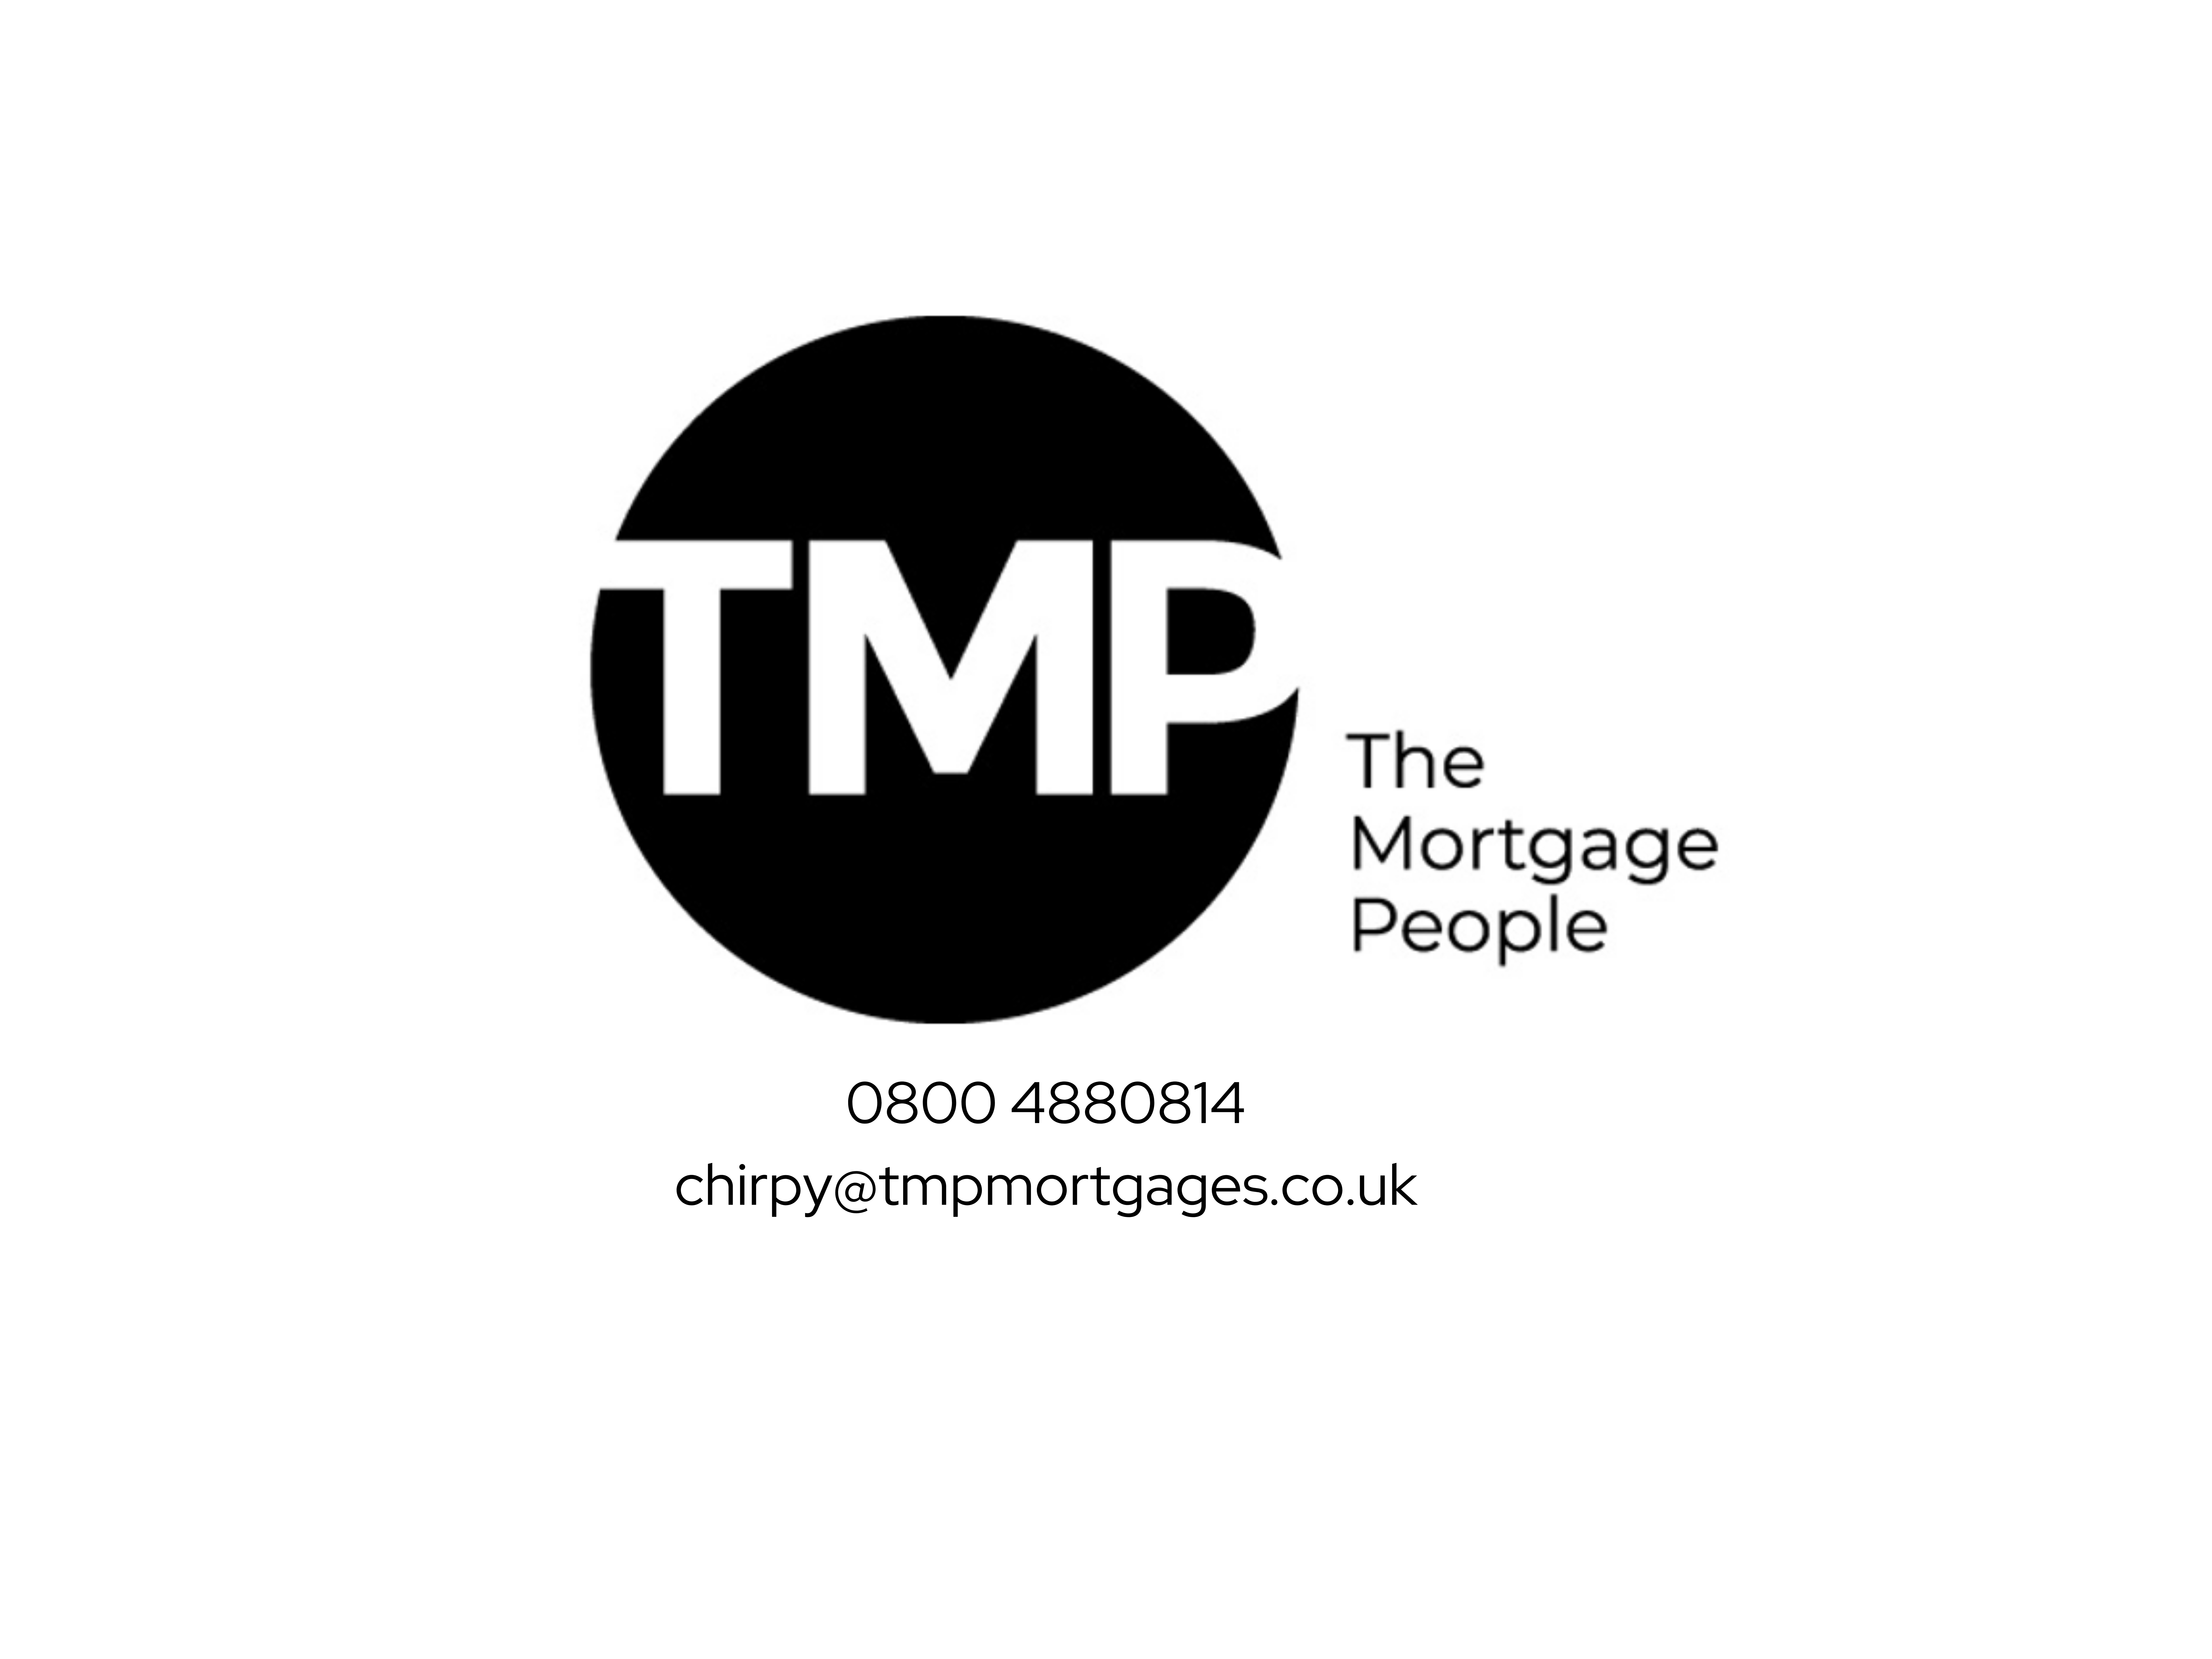 The Mortgage People logo